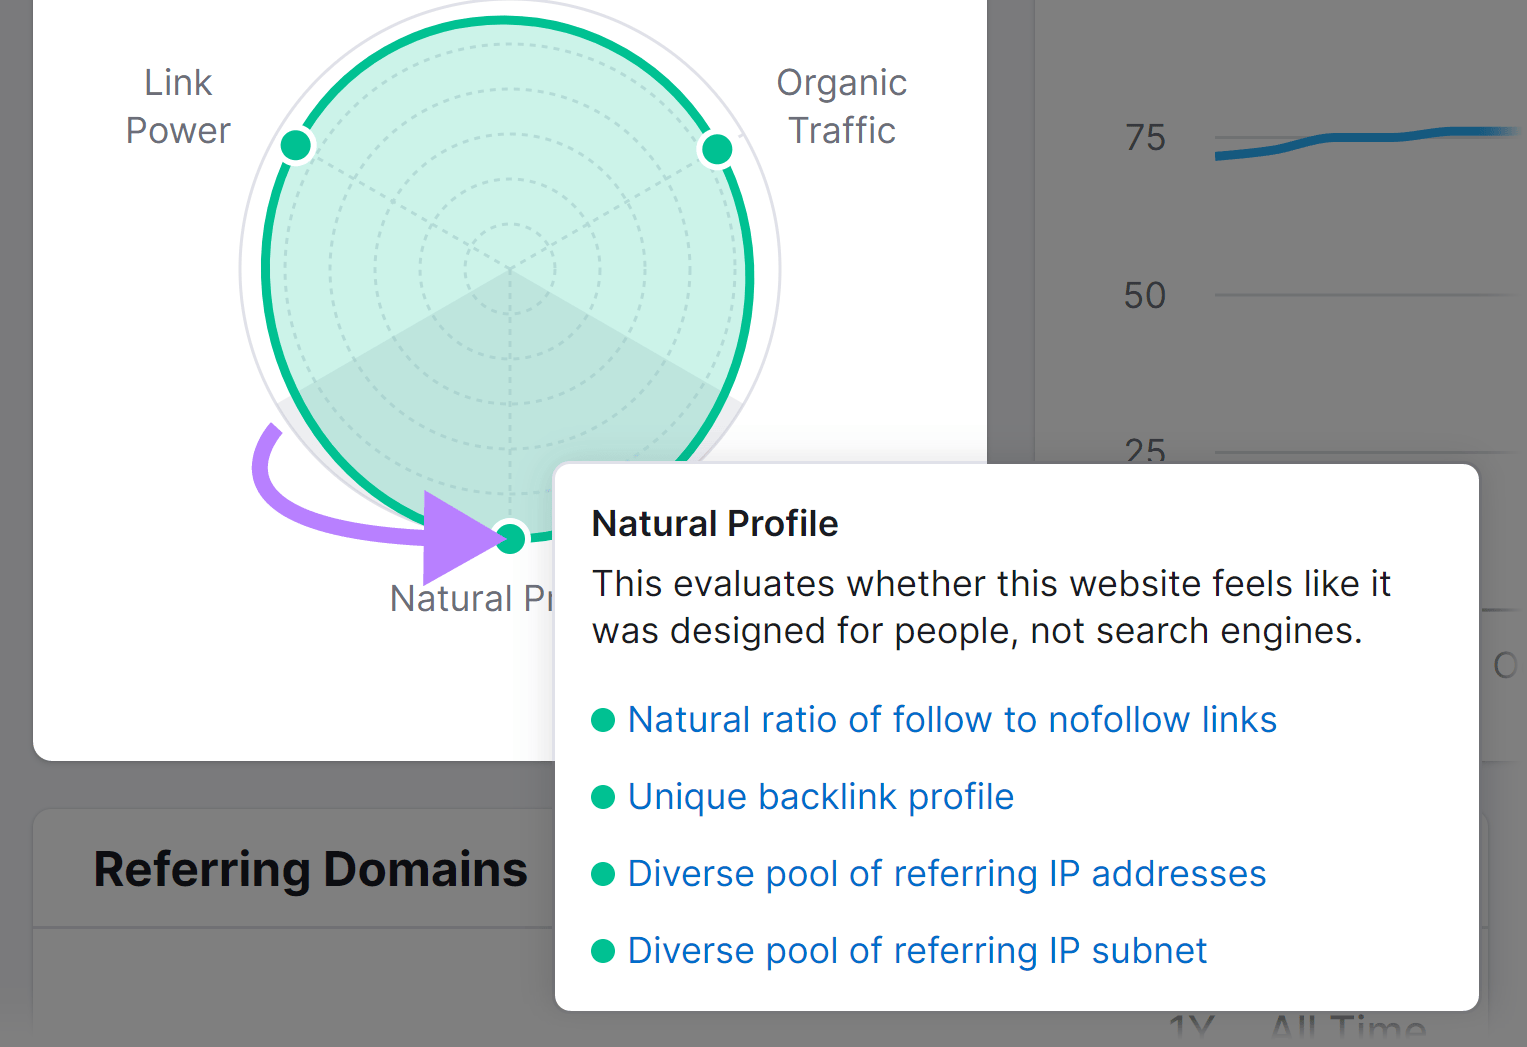 "Natural profile" calculation explained "This evaluates weather this website feels like it was designed for people, not search engines."